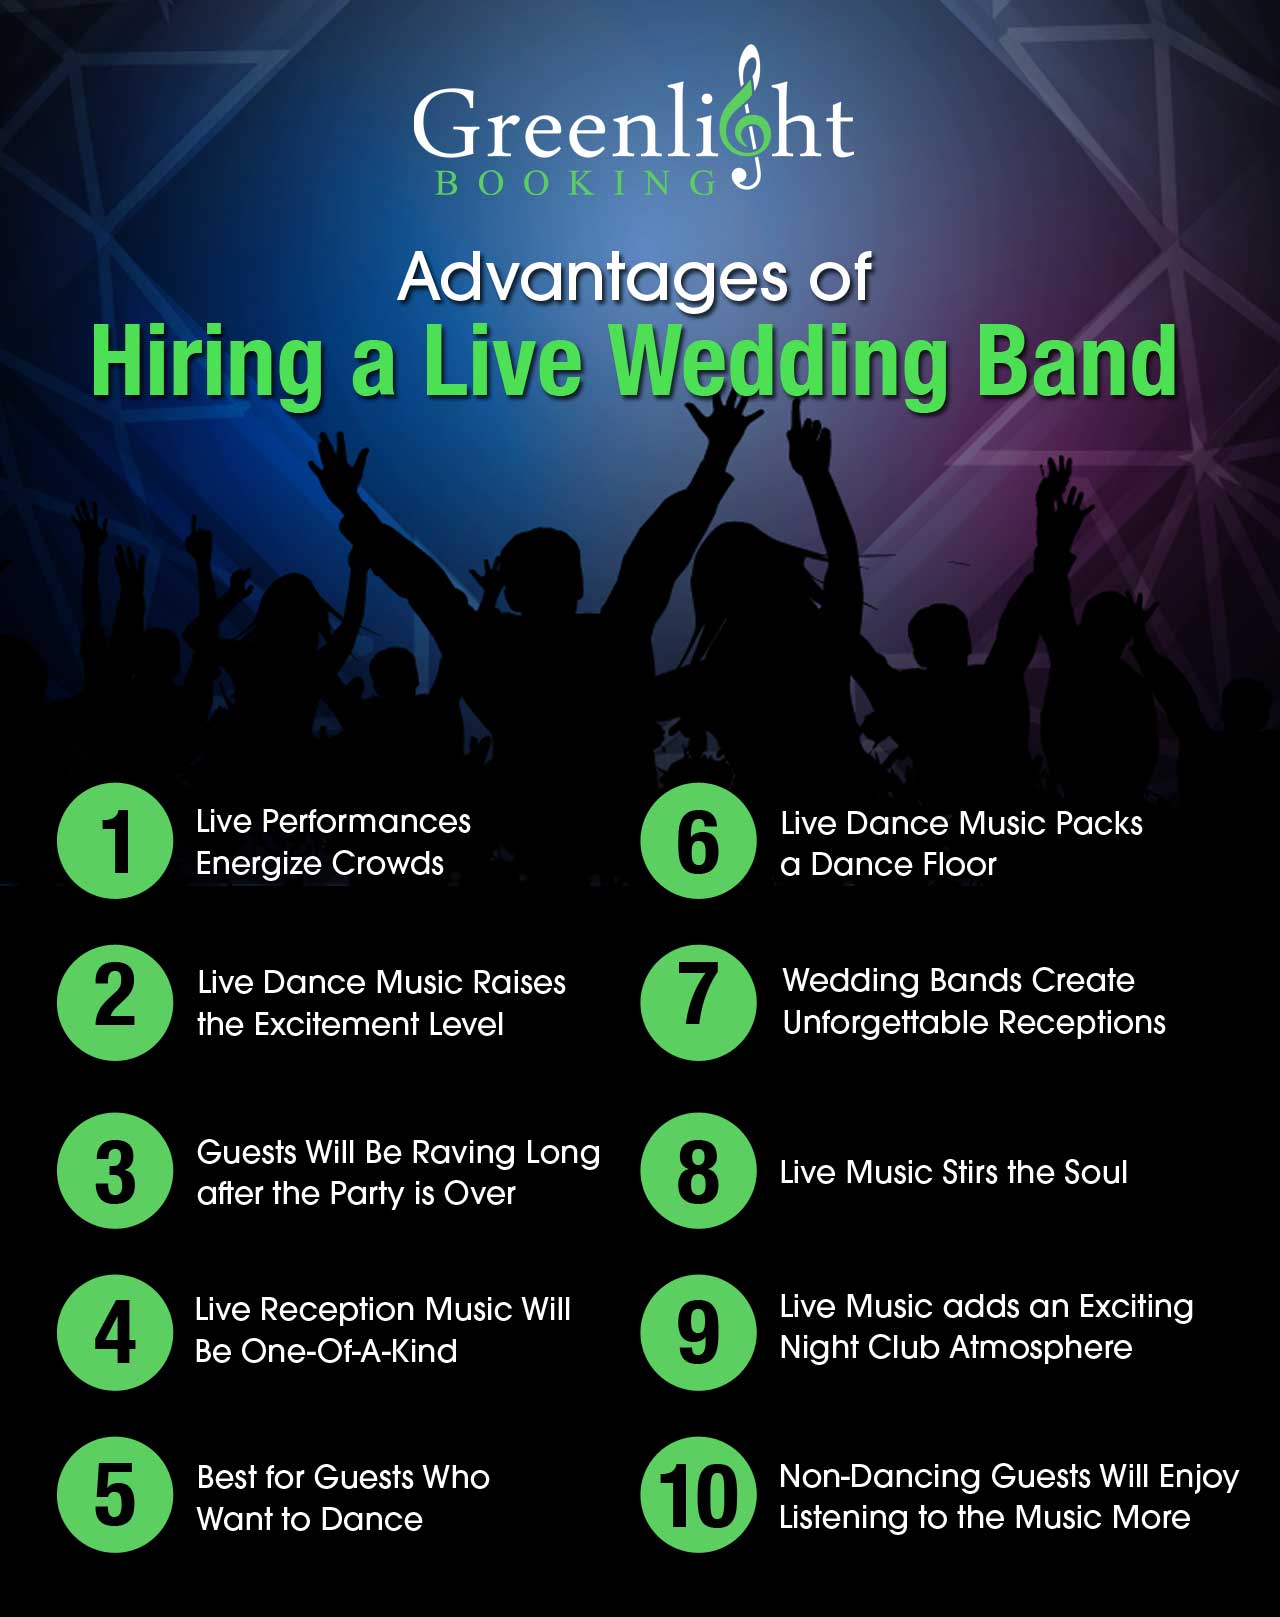 Hire a Wedding Band for the Ultimate Wedding Reception